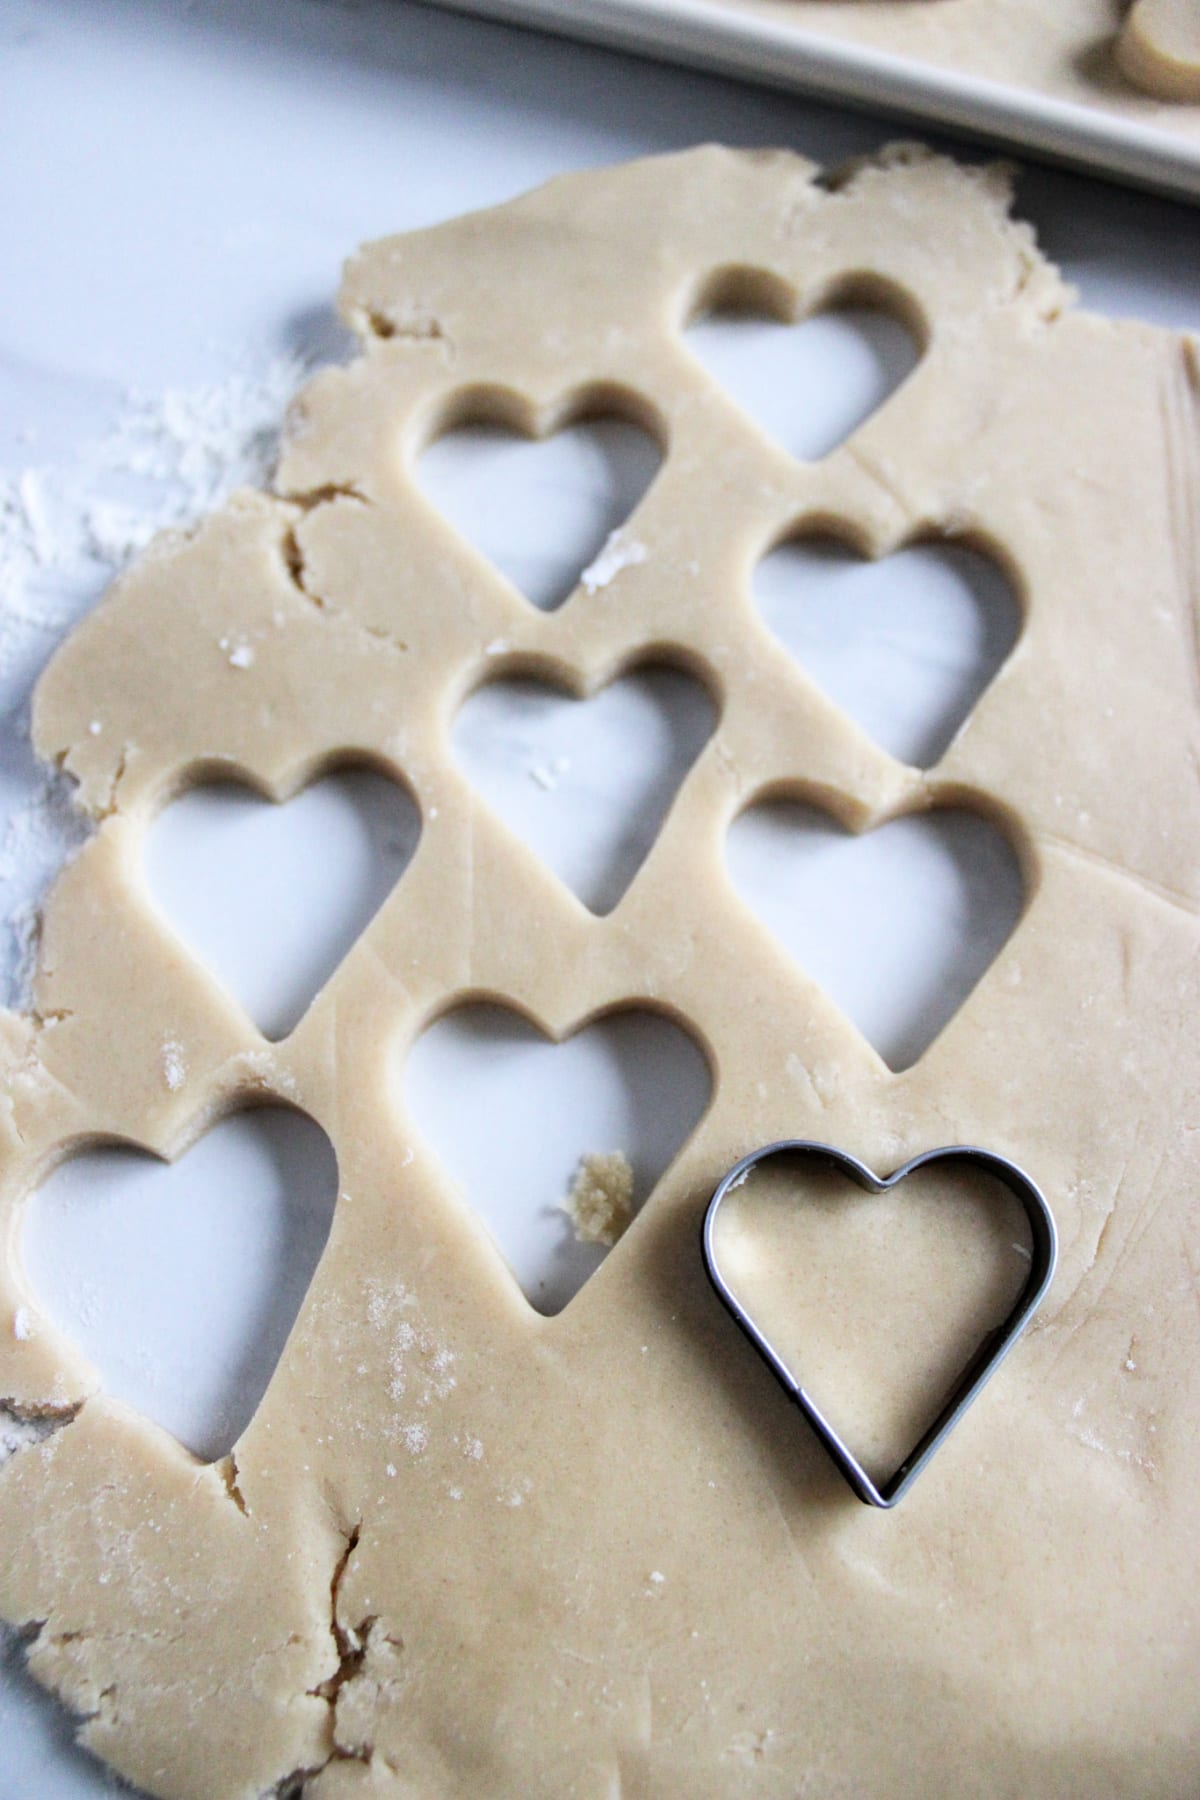 cookie dough being cut into hearts with a heart shaped cookie cutter